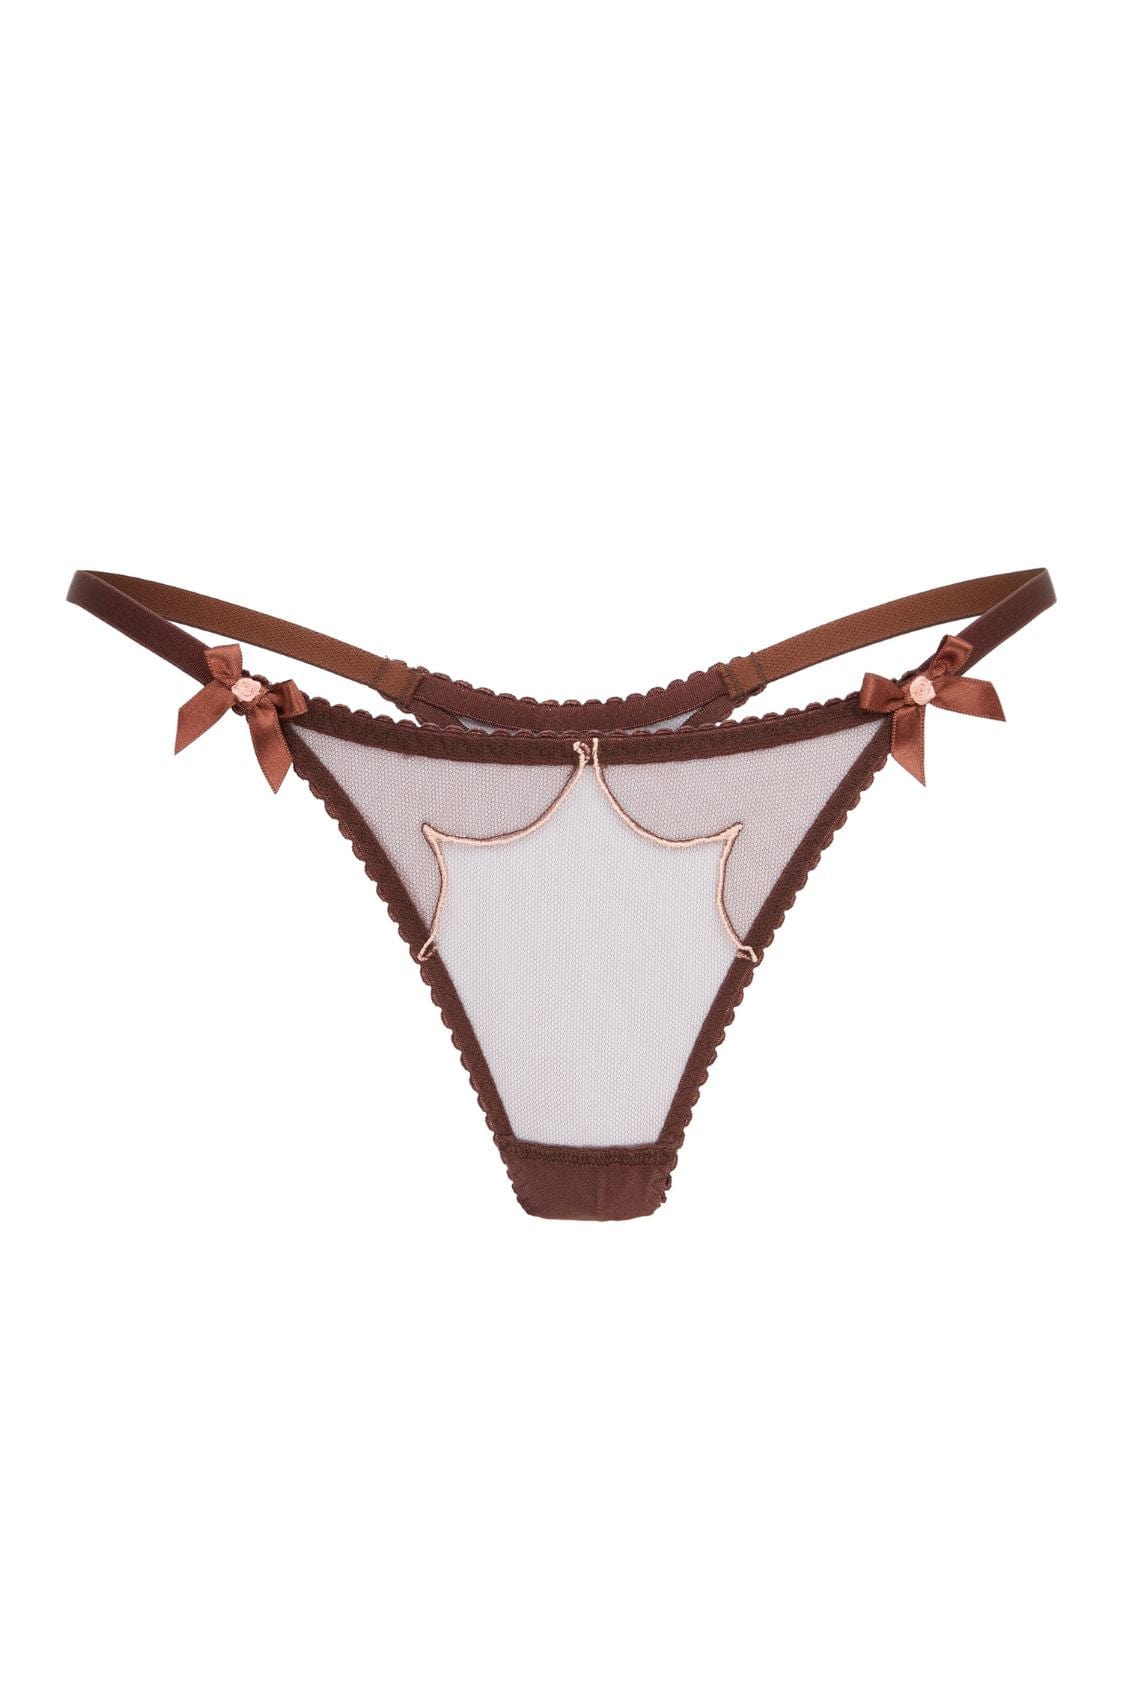 Agent Provocateur Thong Lorna Thong - Brown/Peach